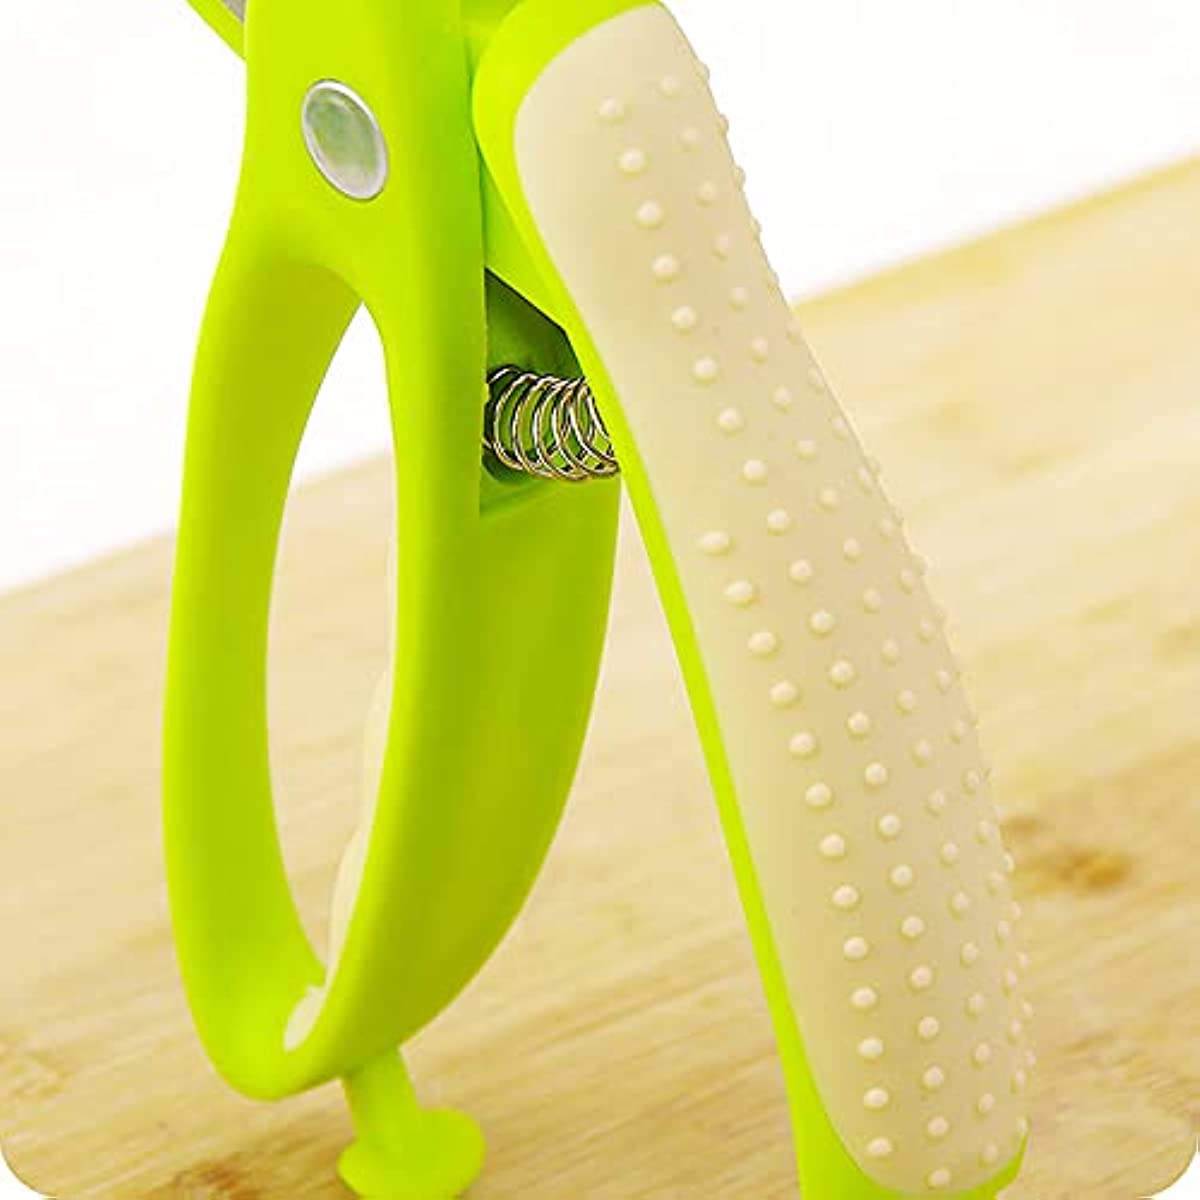 Salad Scissors for Chopped Salad, Salad Cutter Chopped Salad Tong